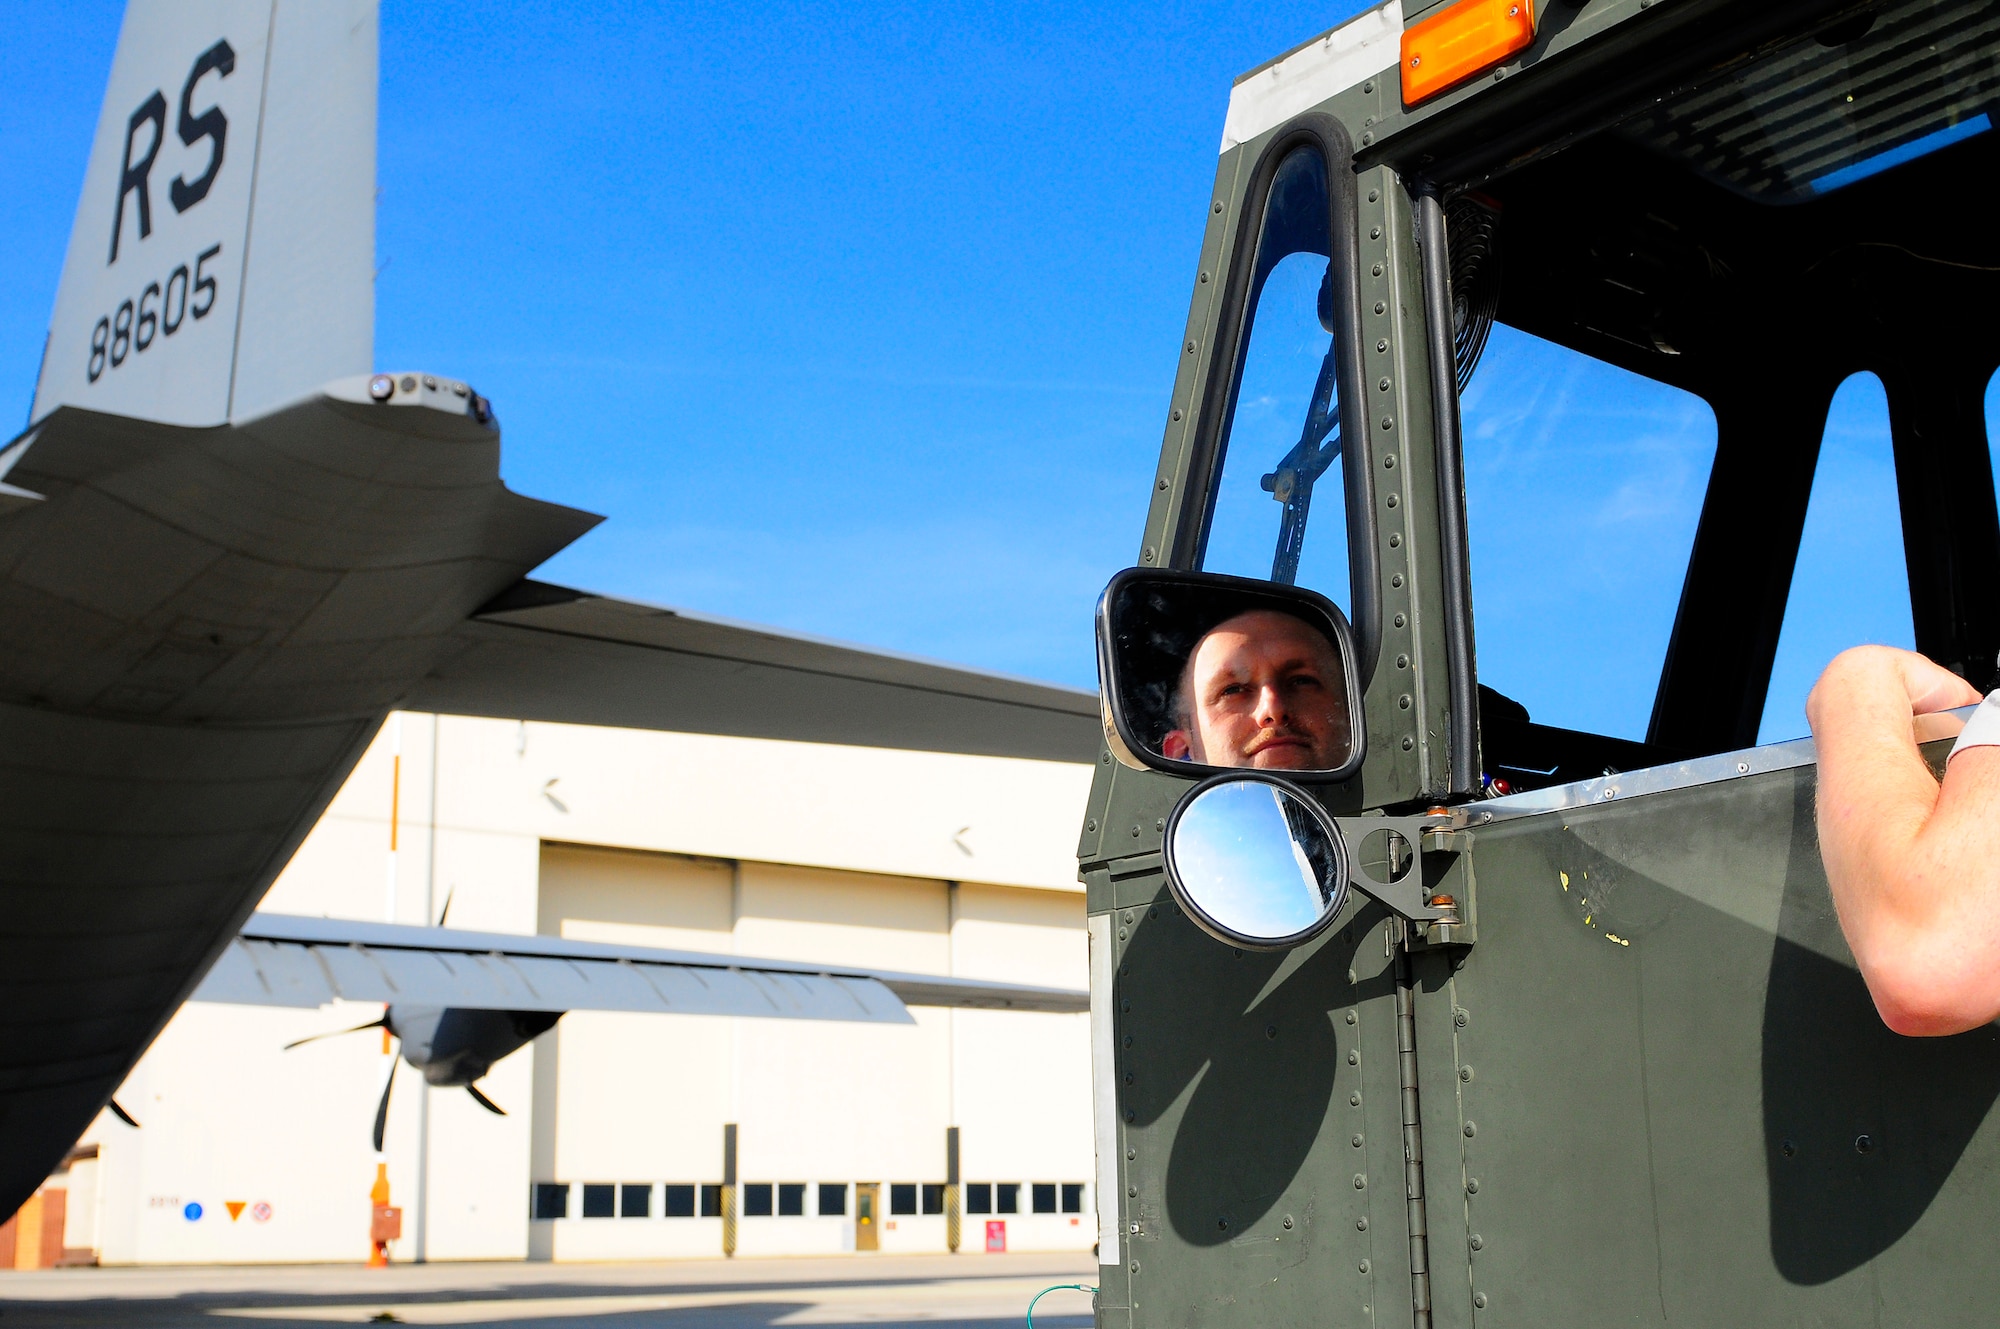 U.S. Air Force Senior Airman Adam Mertz, 721st Aerial Port Squadron, waits to load cargo on a C-130J Super Hercules for its departure in support of Joint Task Force Odyssey Dawn, Ramstein Air Base, Germany, March 24, 2011. Joint Task Force Odyssey Dawn is the U.S. Africa Command task force established to provide operational and tactical command and control of U.S. military forces supporting the international response to the unrest in Libya and enforcement of United Nations Security Council Resolution 1973. UNSCR 1973 authorizes all necessary measures to protect civilians in Libya under threat of attack by Qadhafi regime forces. JTF Odyssey Dawn is commanded by U.S. Navy Admiral Samuel J. Locklear, III. (U.S. Air Force Photo by Airman 1st Class Brea Miller)